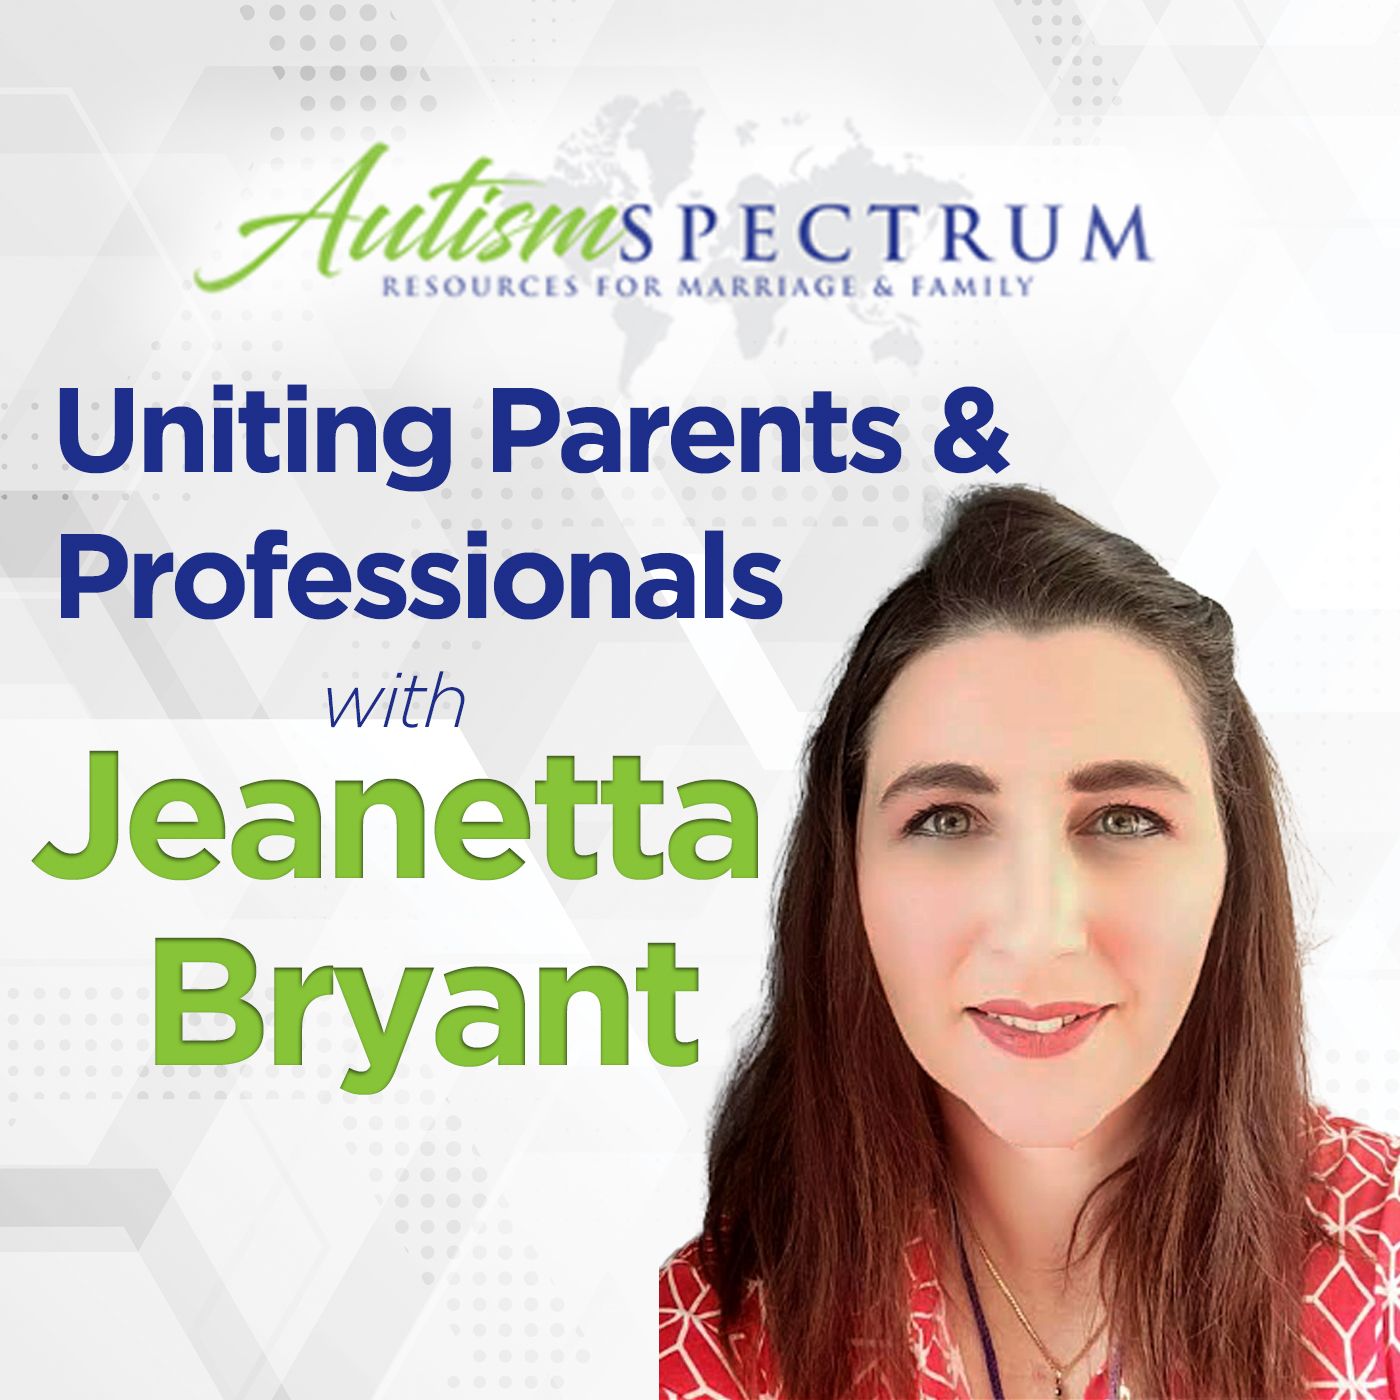 Uniting Parents & Professionals with Jeanetta Bryant